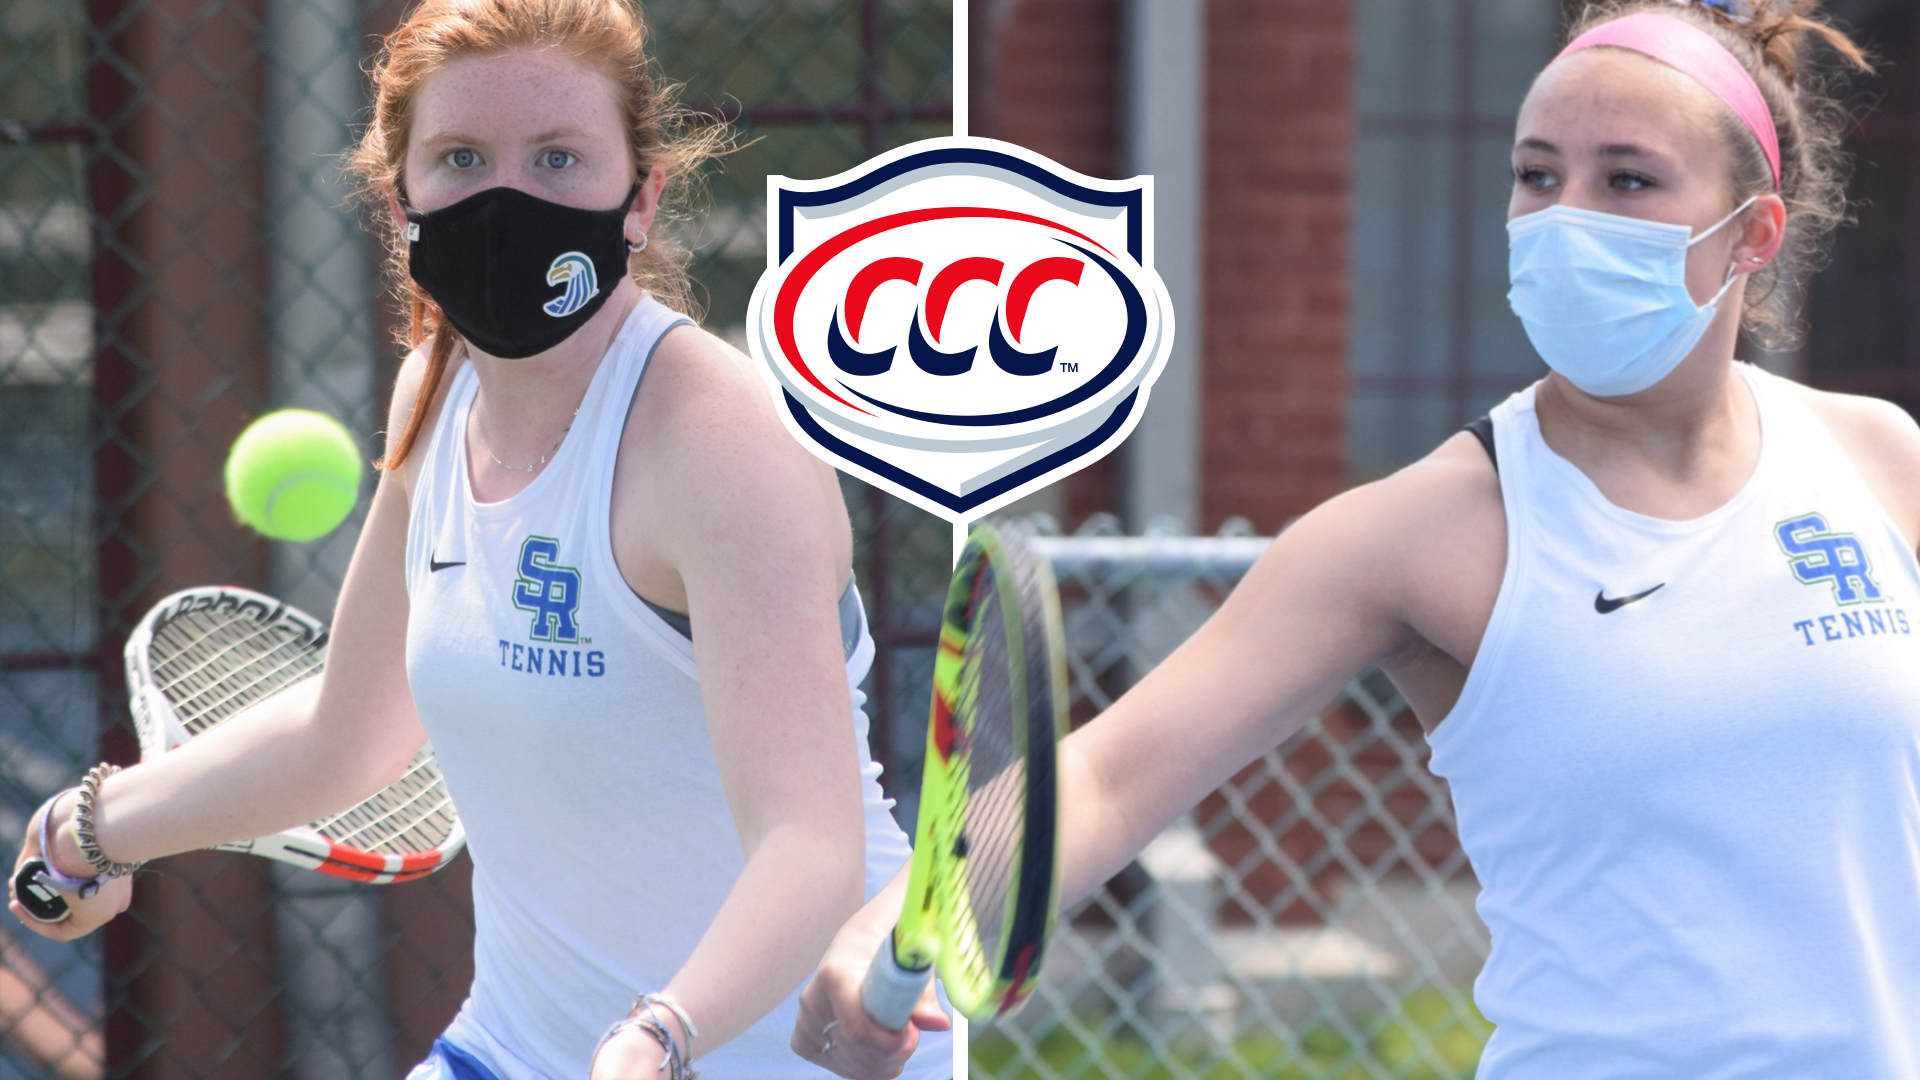 2020-21 All-CCC Seahawks (l to r): Alexa Stevens paired with Sailor Nordstrom for Third Team Doubles while Nordstrom also got the nod for Second Team Singles.